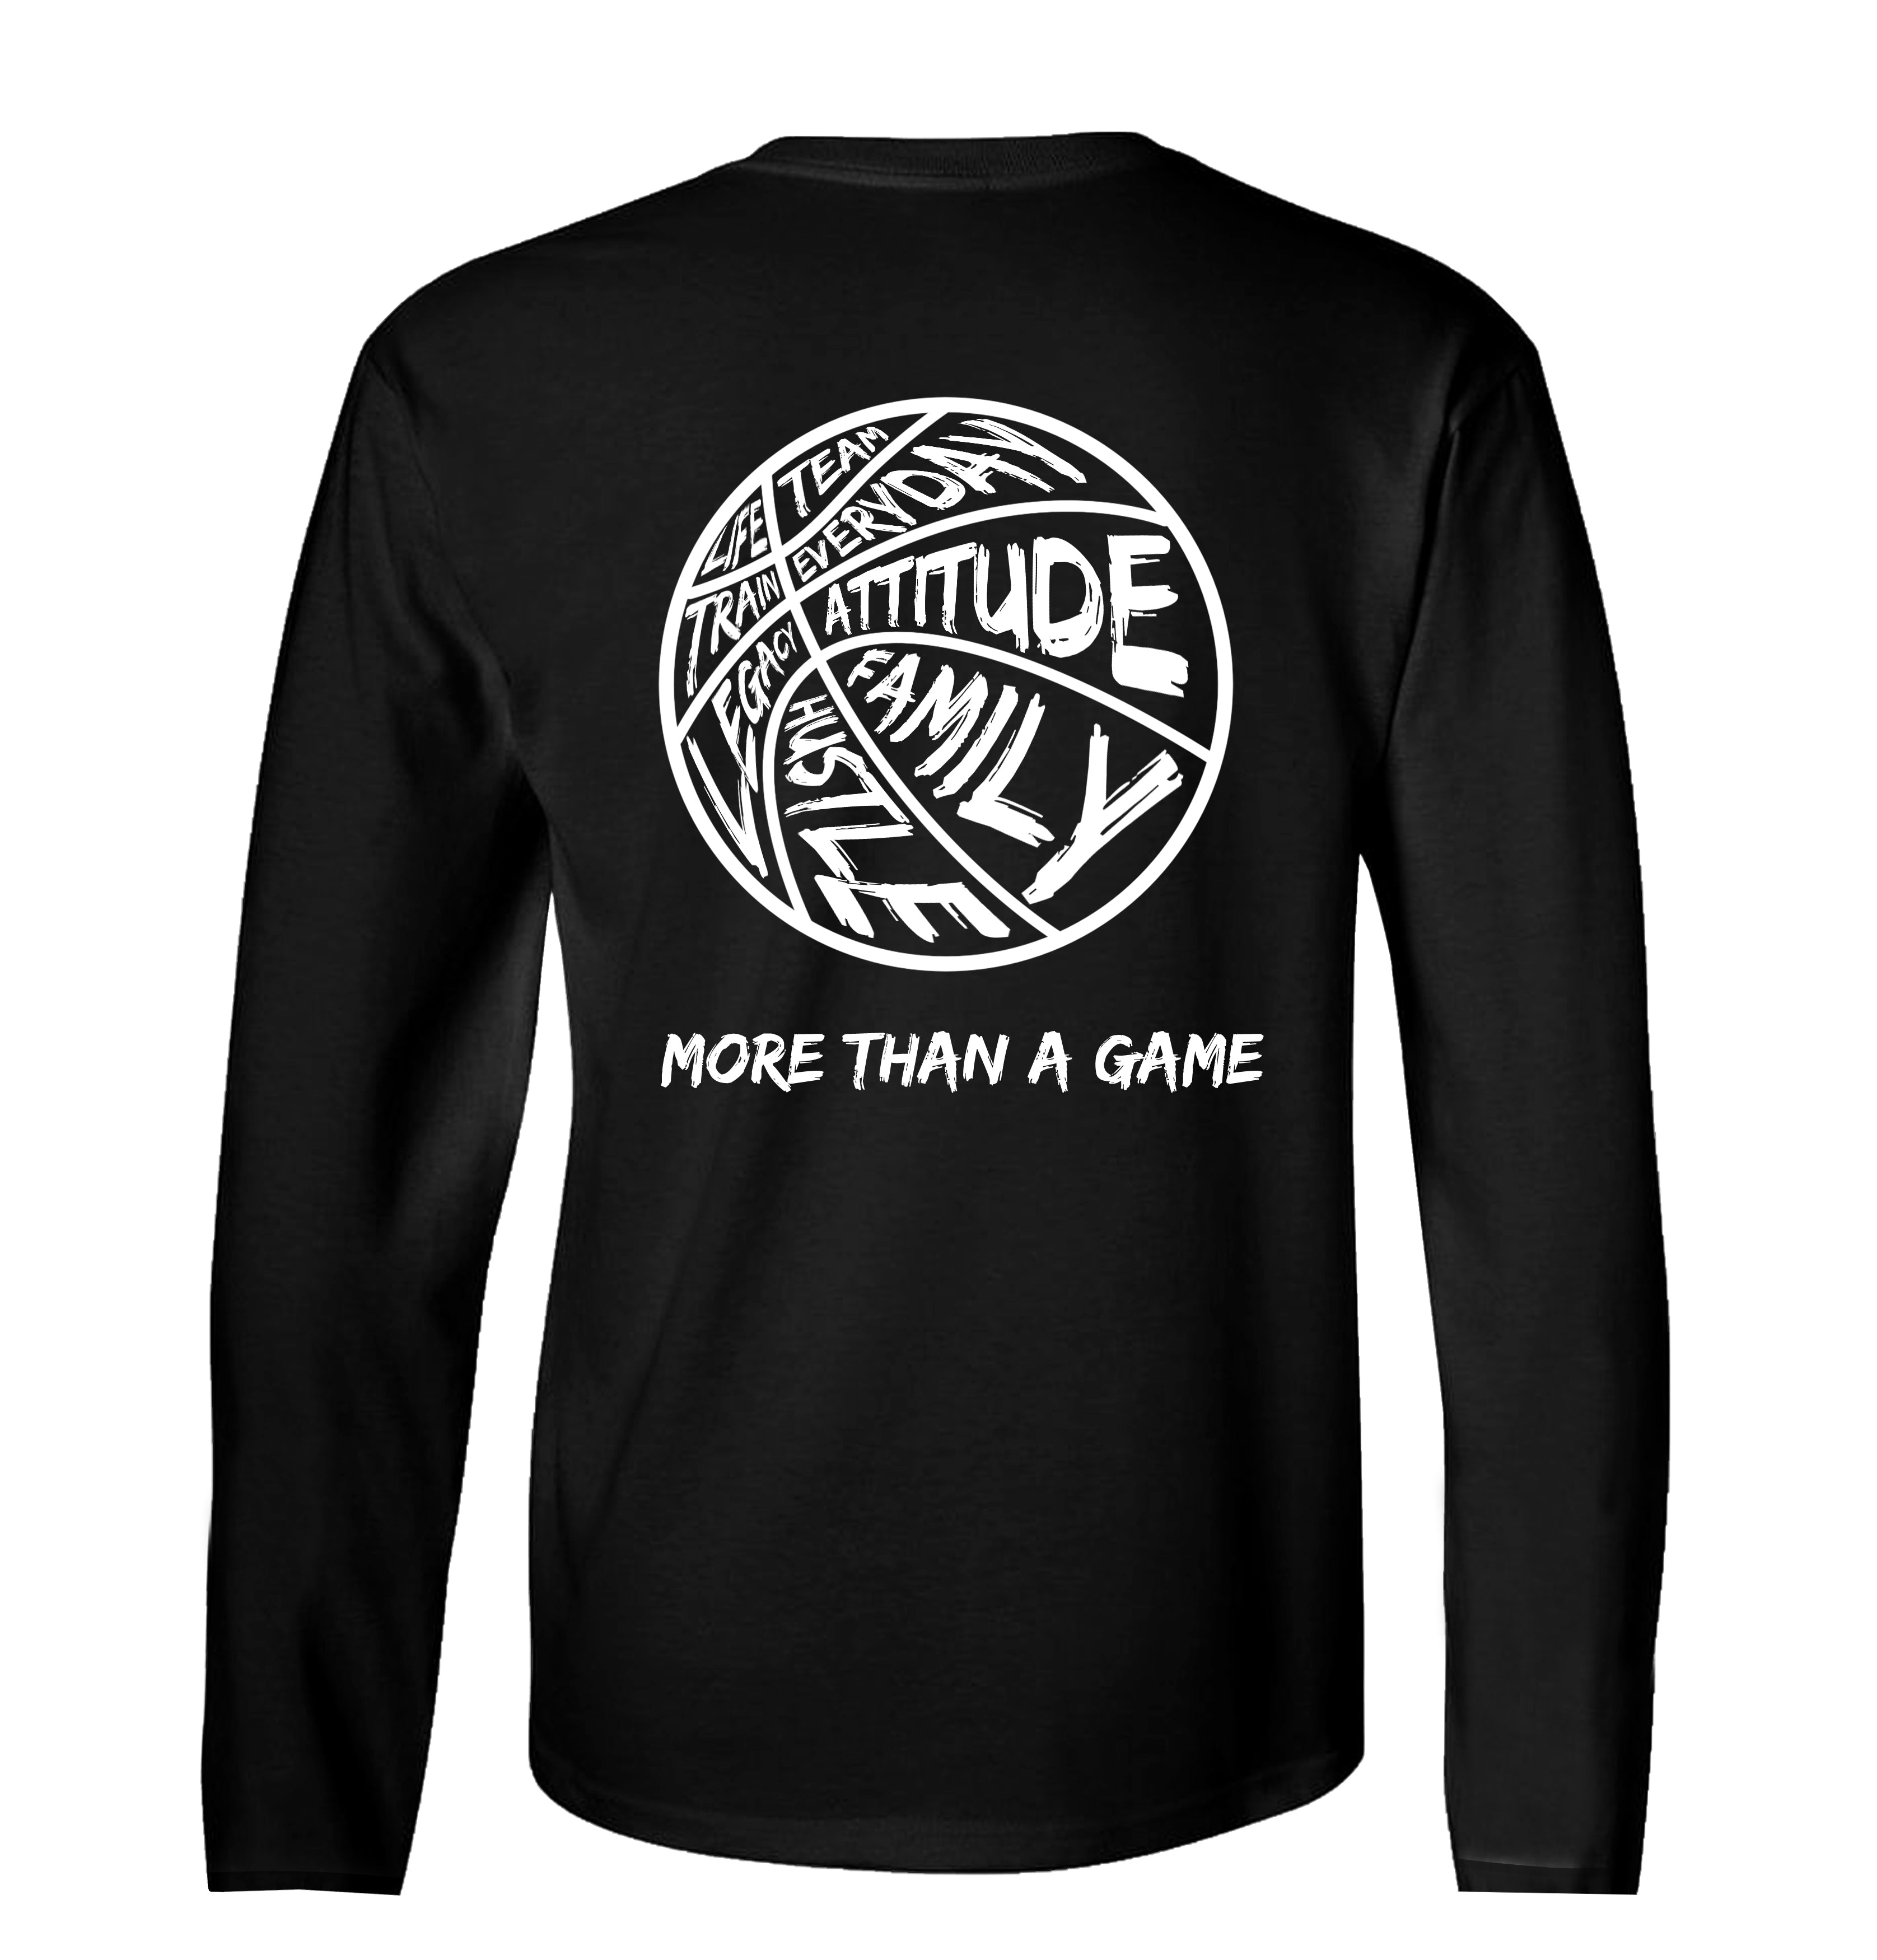 More Than A Game - Long Sleeve - Black - Youth